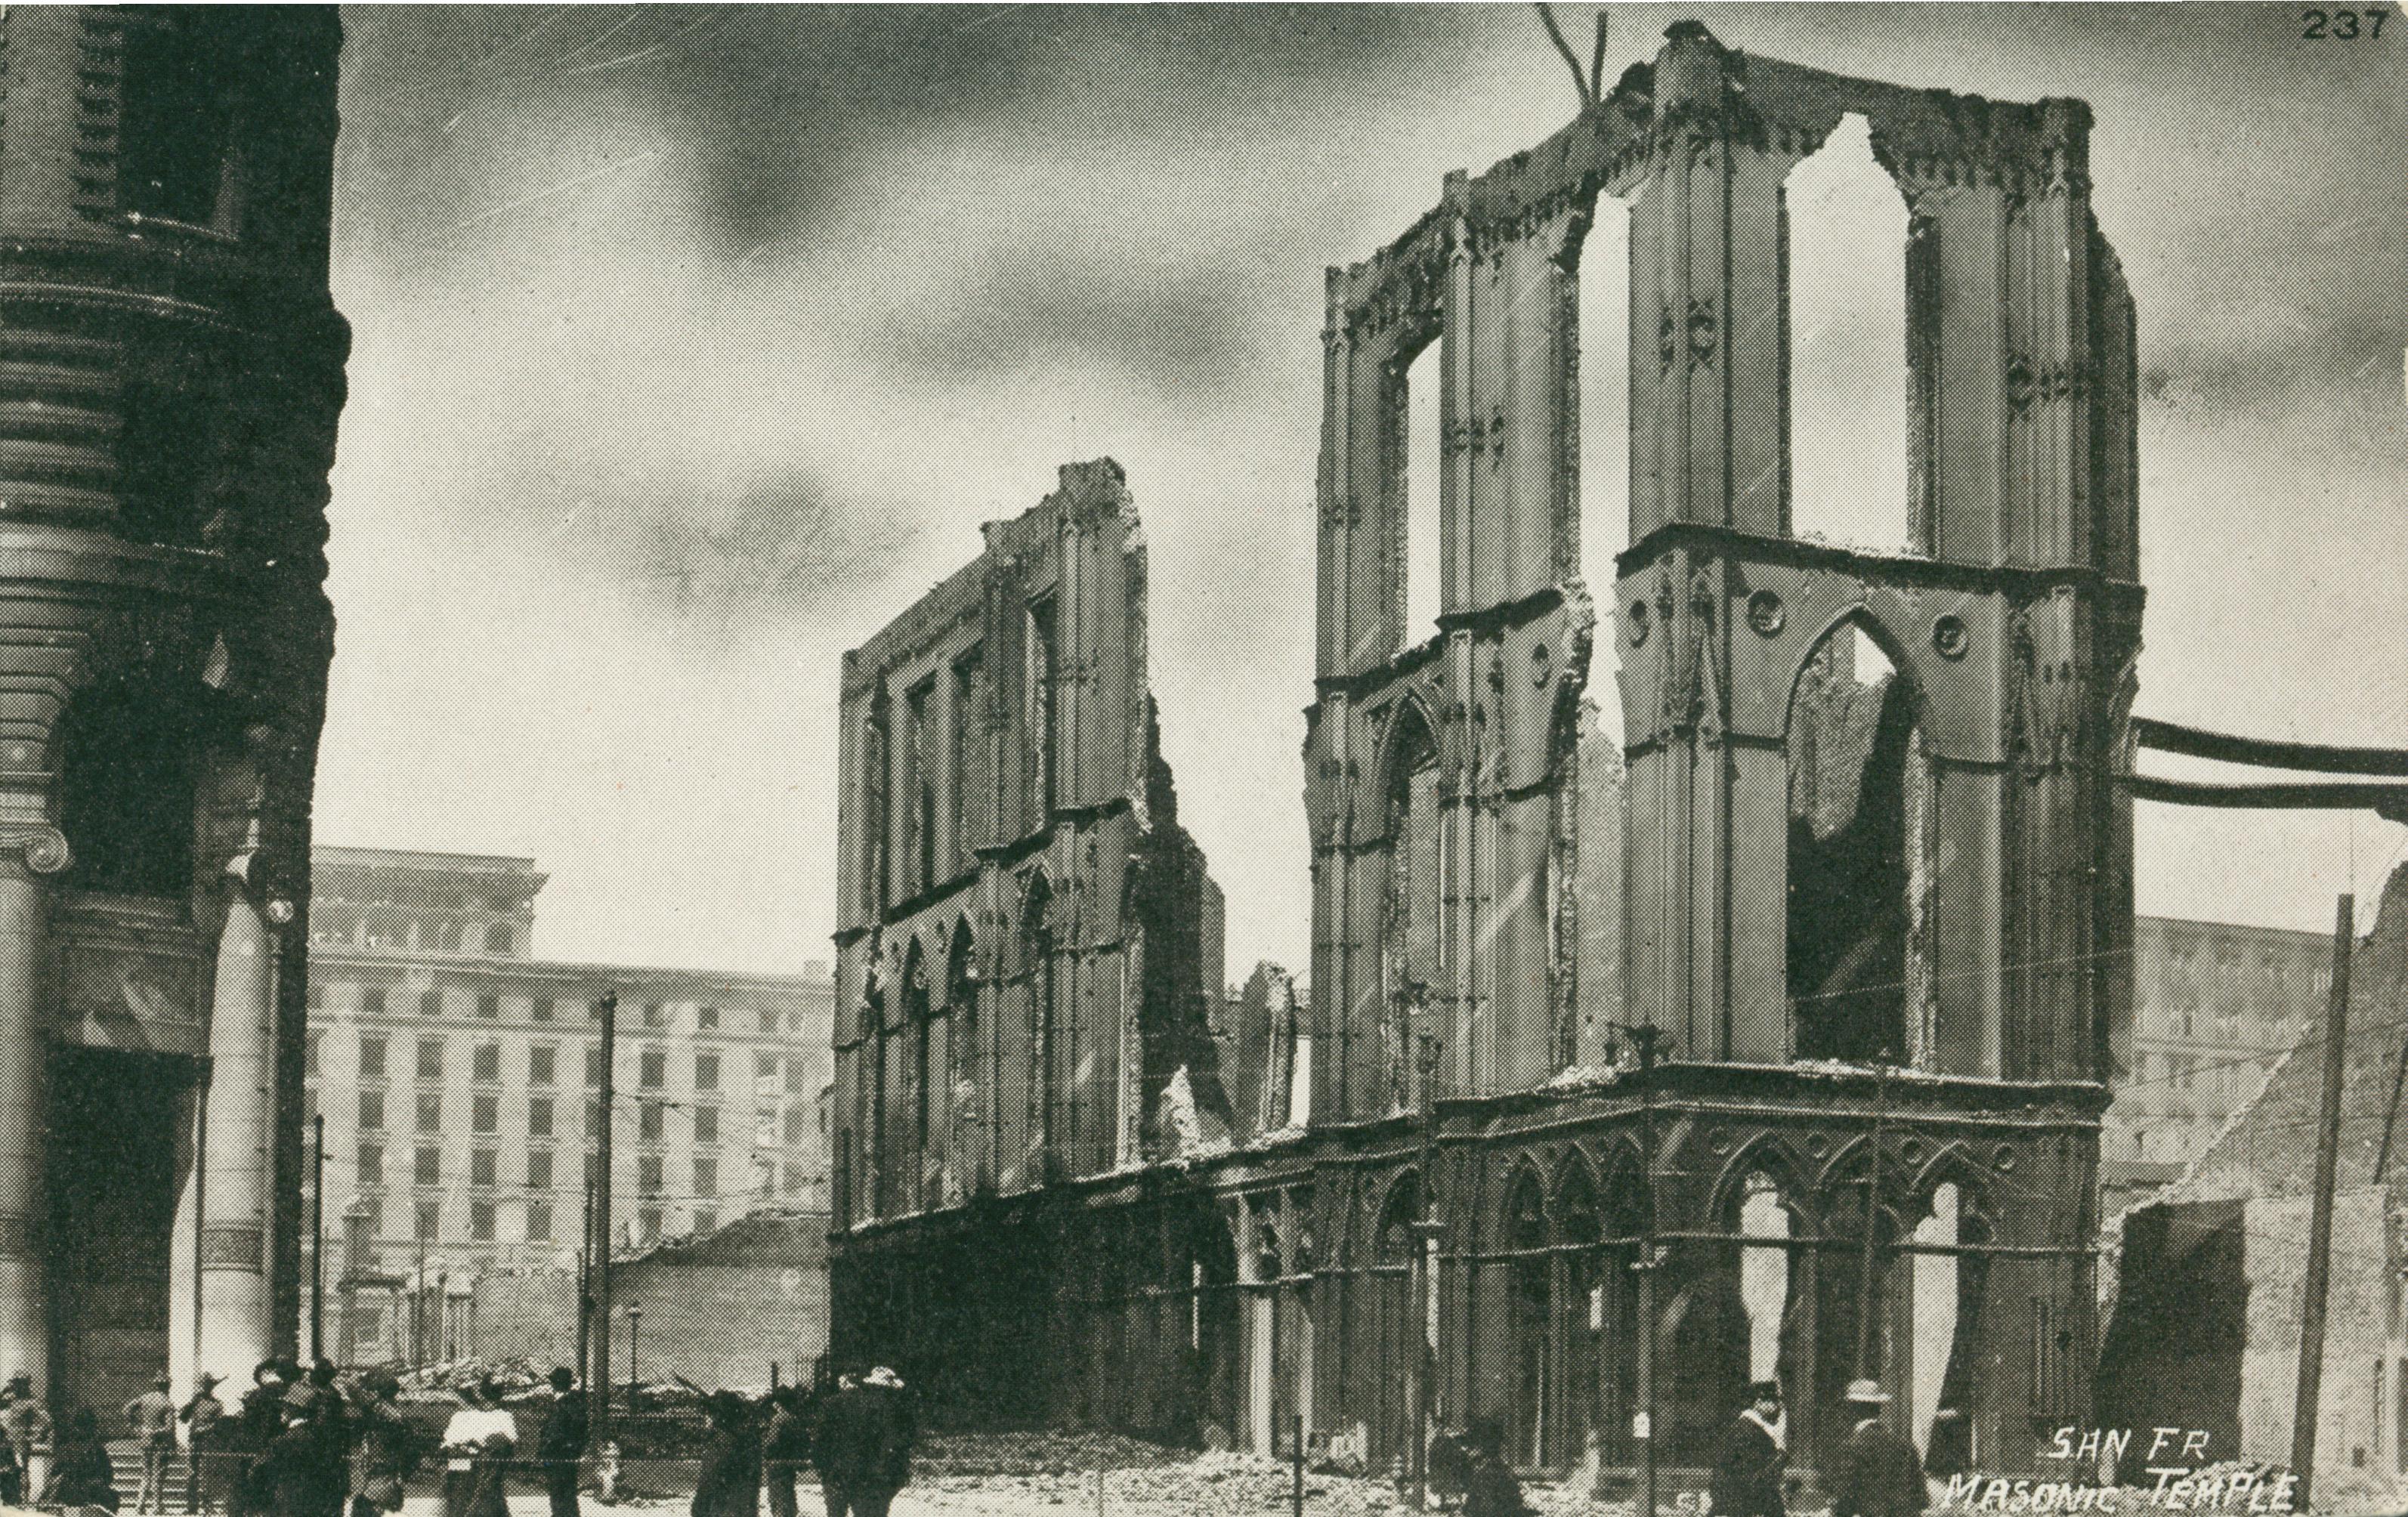 Shows the ruins of the Masonic Temple in San Francisco.